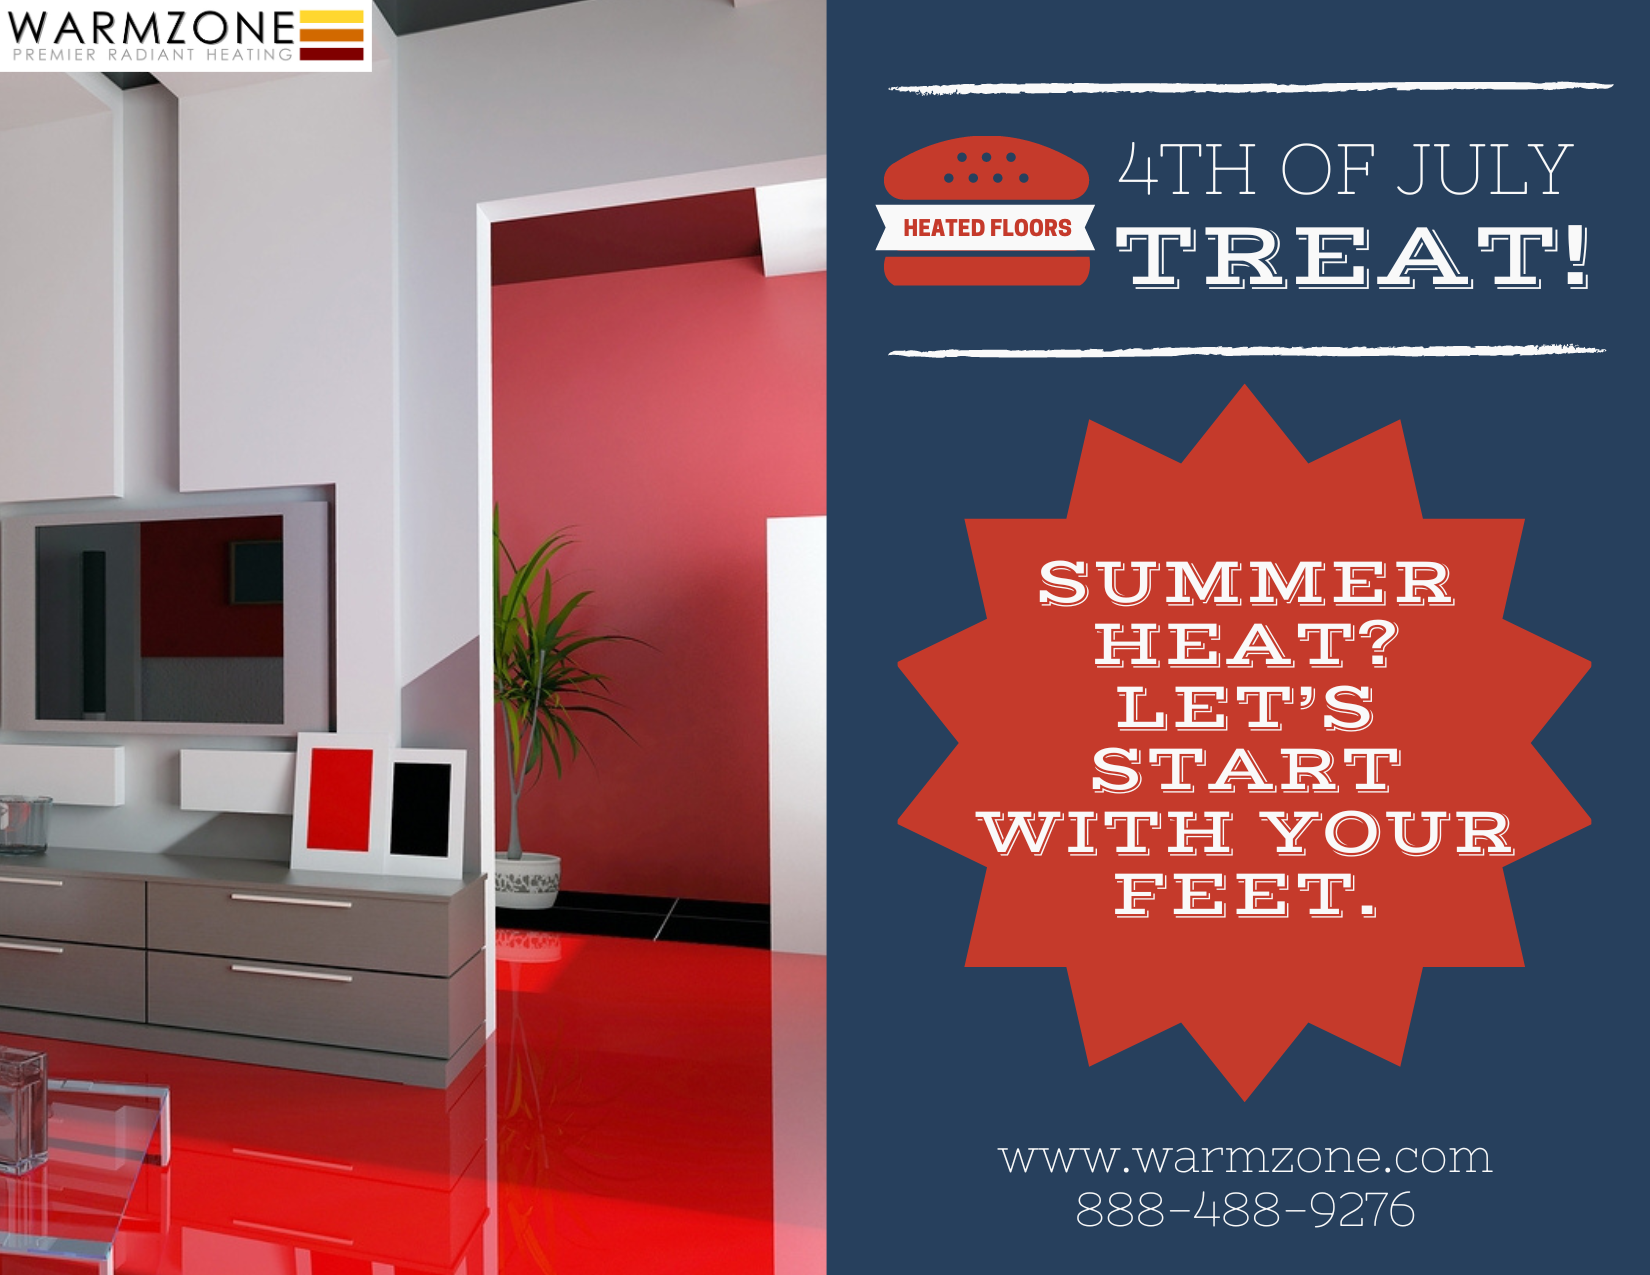 Summer heat. Let's start with your feet - with Warmzone radiant heat solutions.